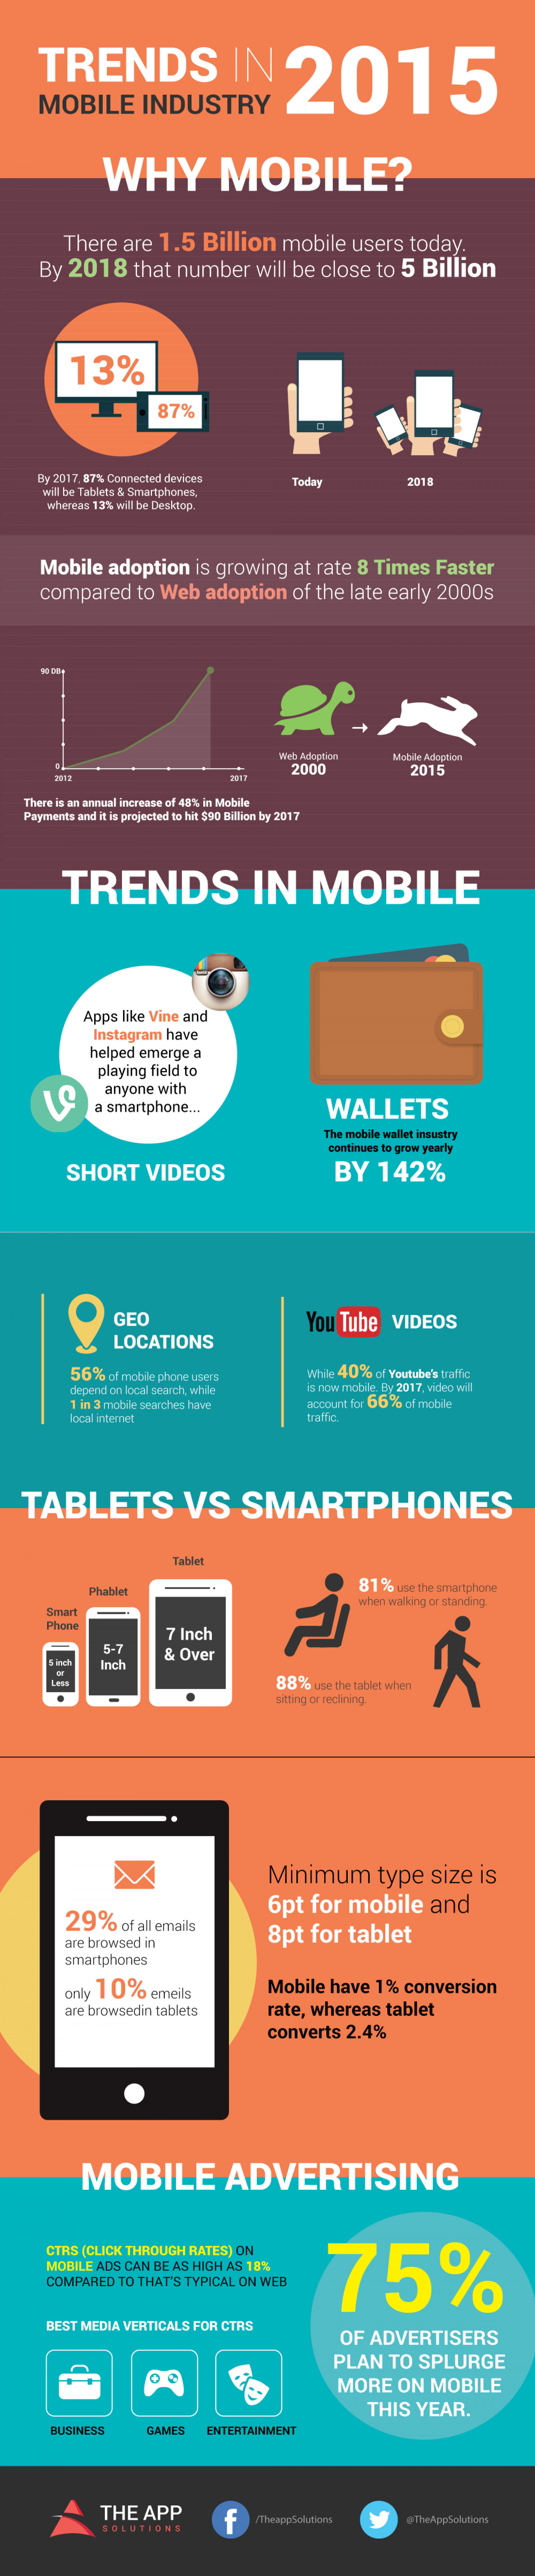 Trends in mobile industry 2015 Infographic